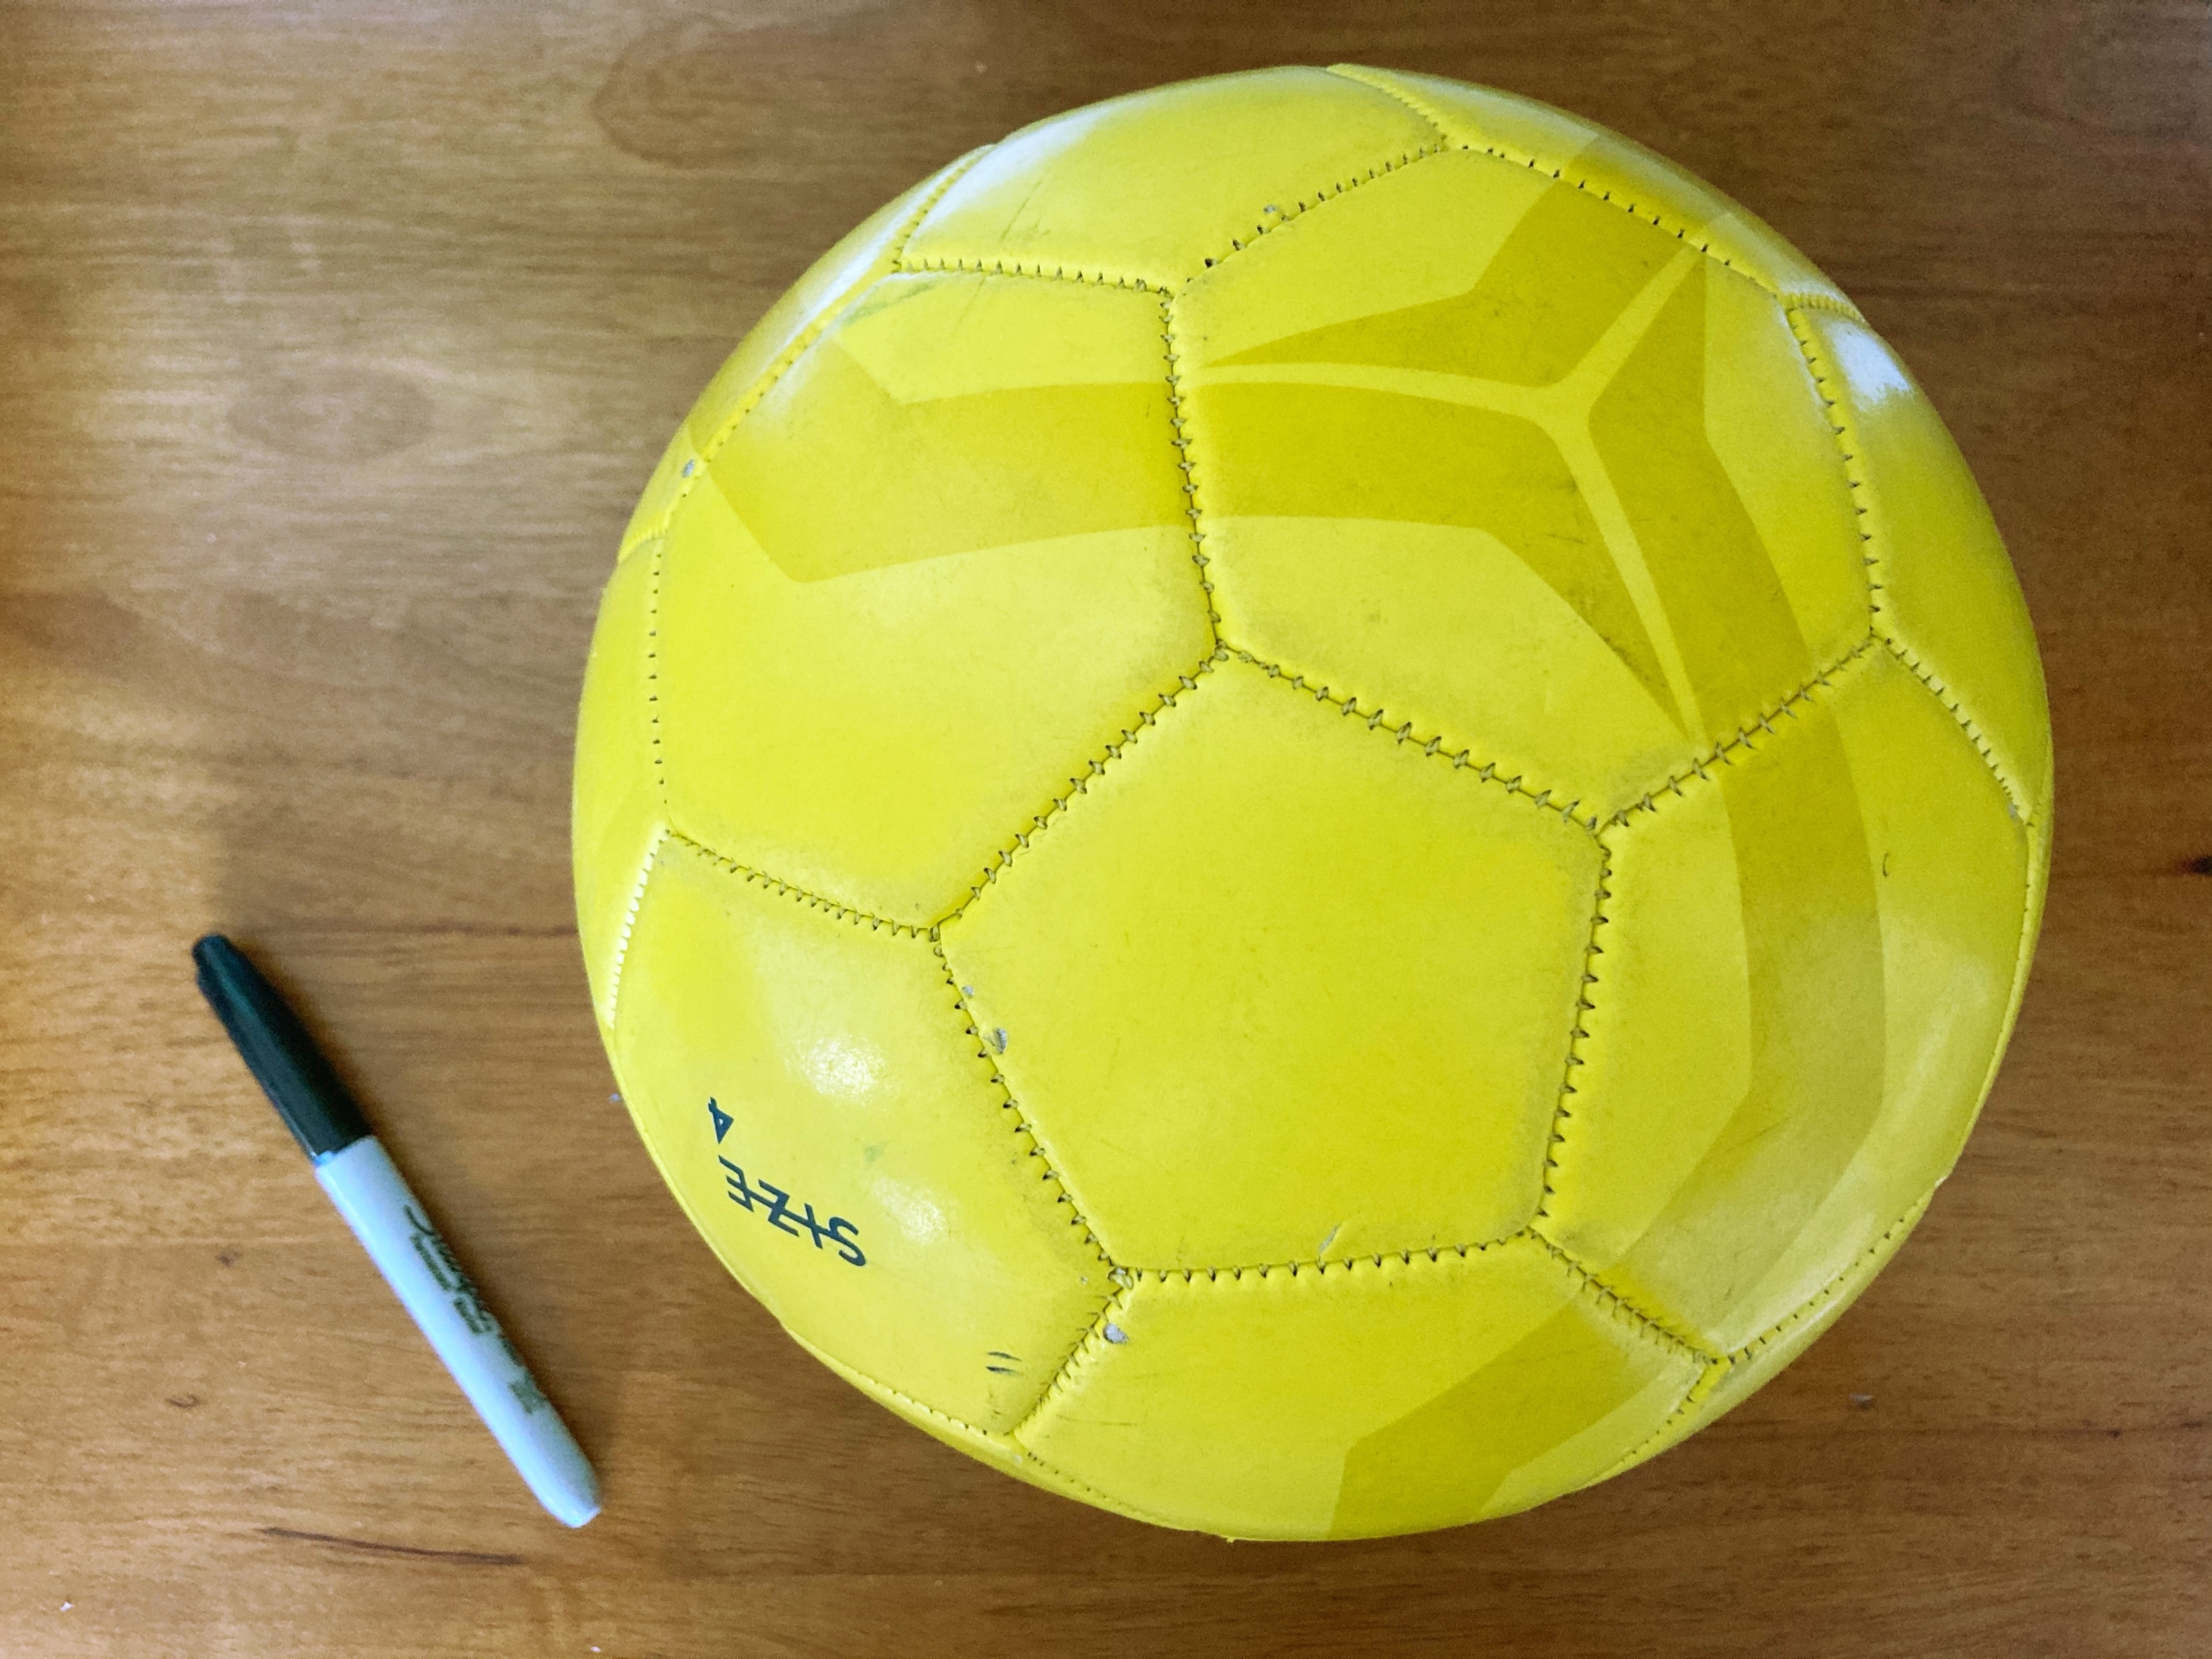 Yellow soccer ball with sharpie next to it